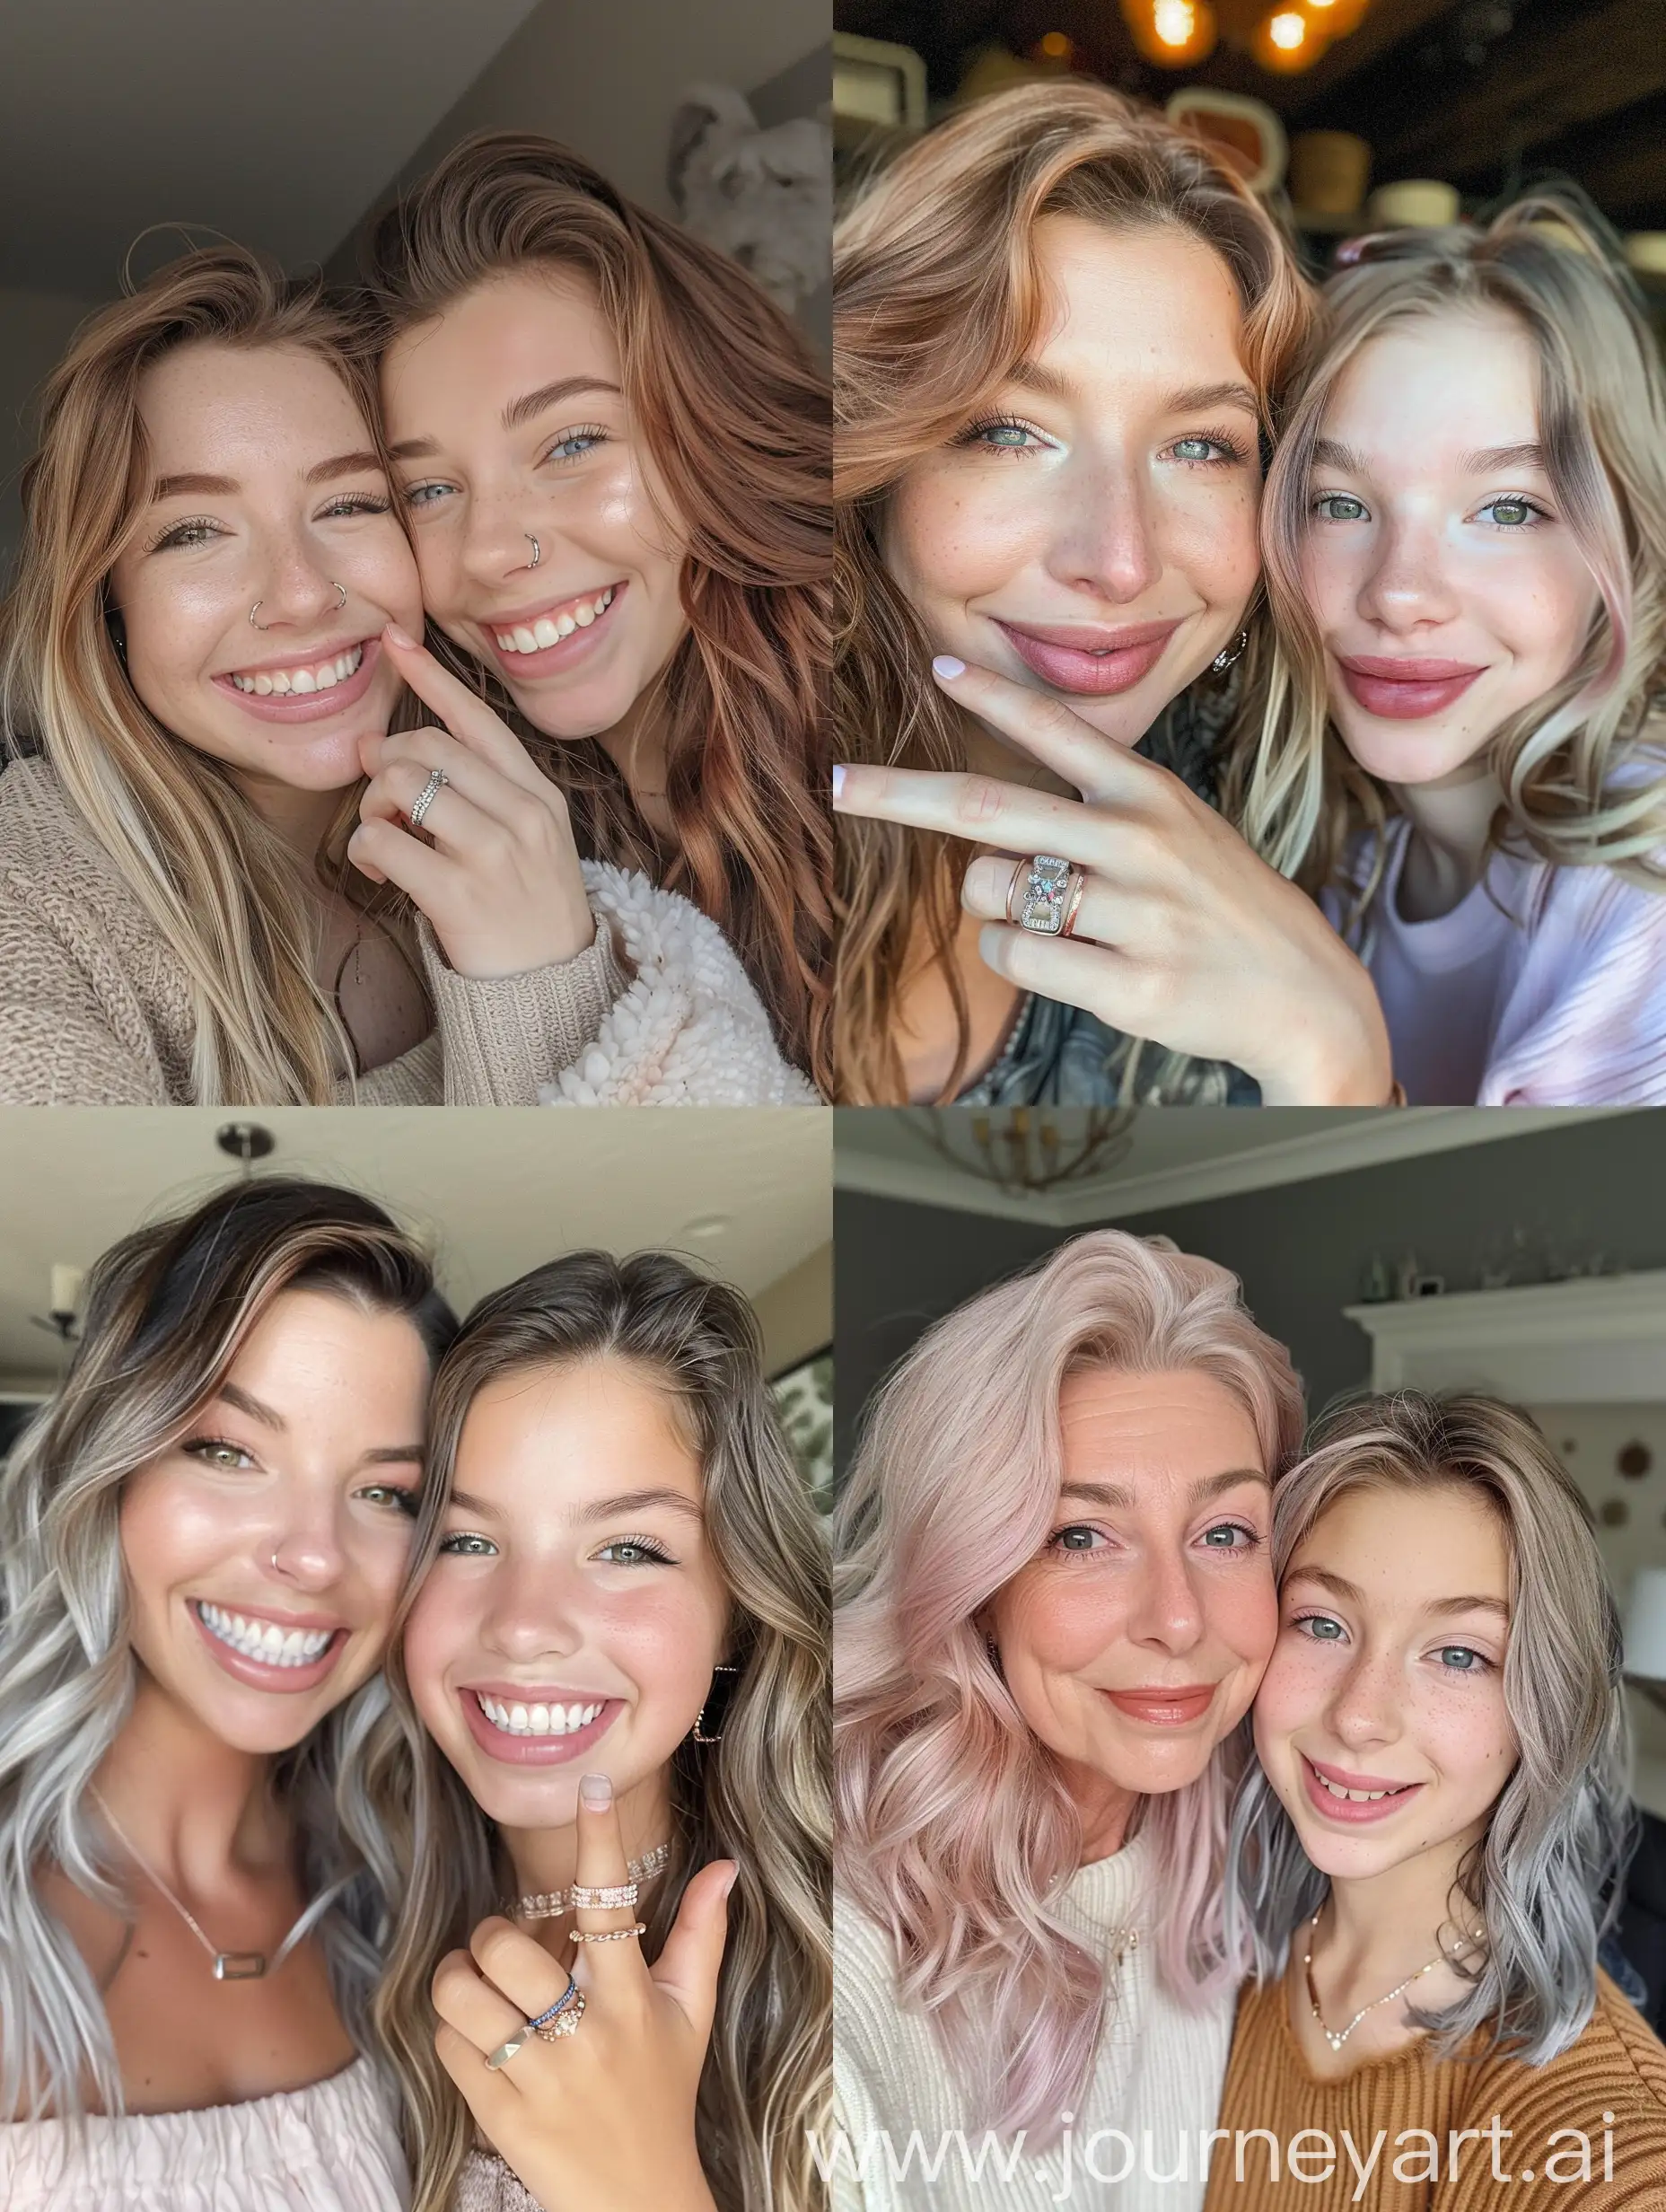 Aesthetic Instagram selfie, mid 30's mother, 16 year old daughter, close up selfie, cute moment together, smiling brightly, adorable, full hair, different hairstyles for each girl, rings